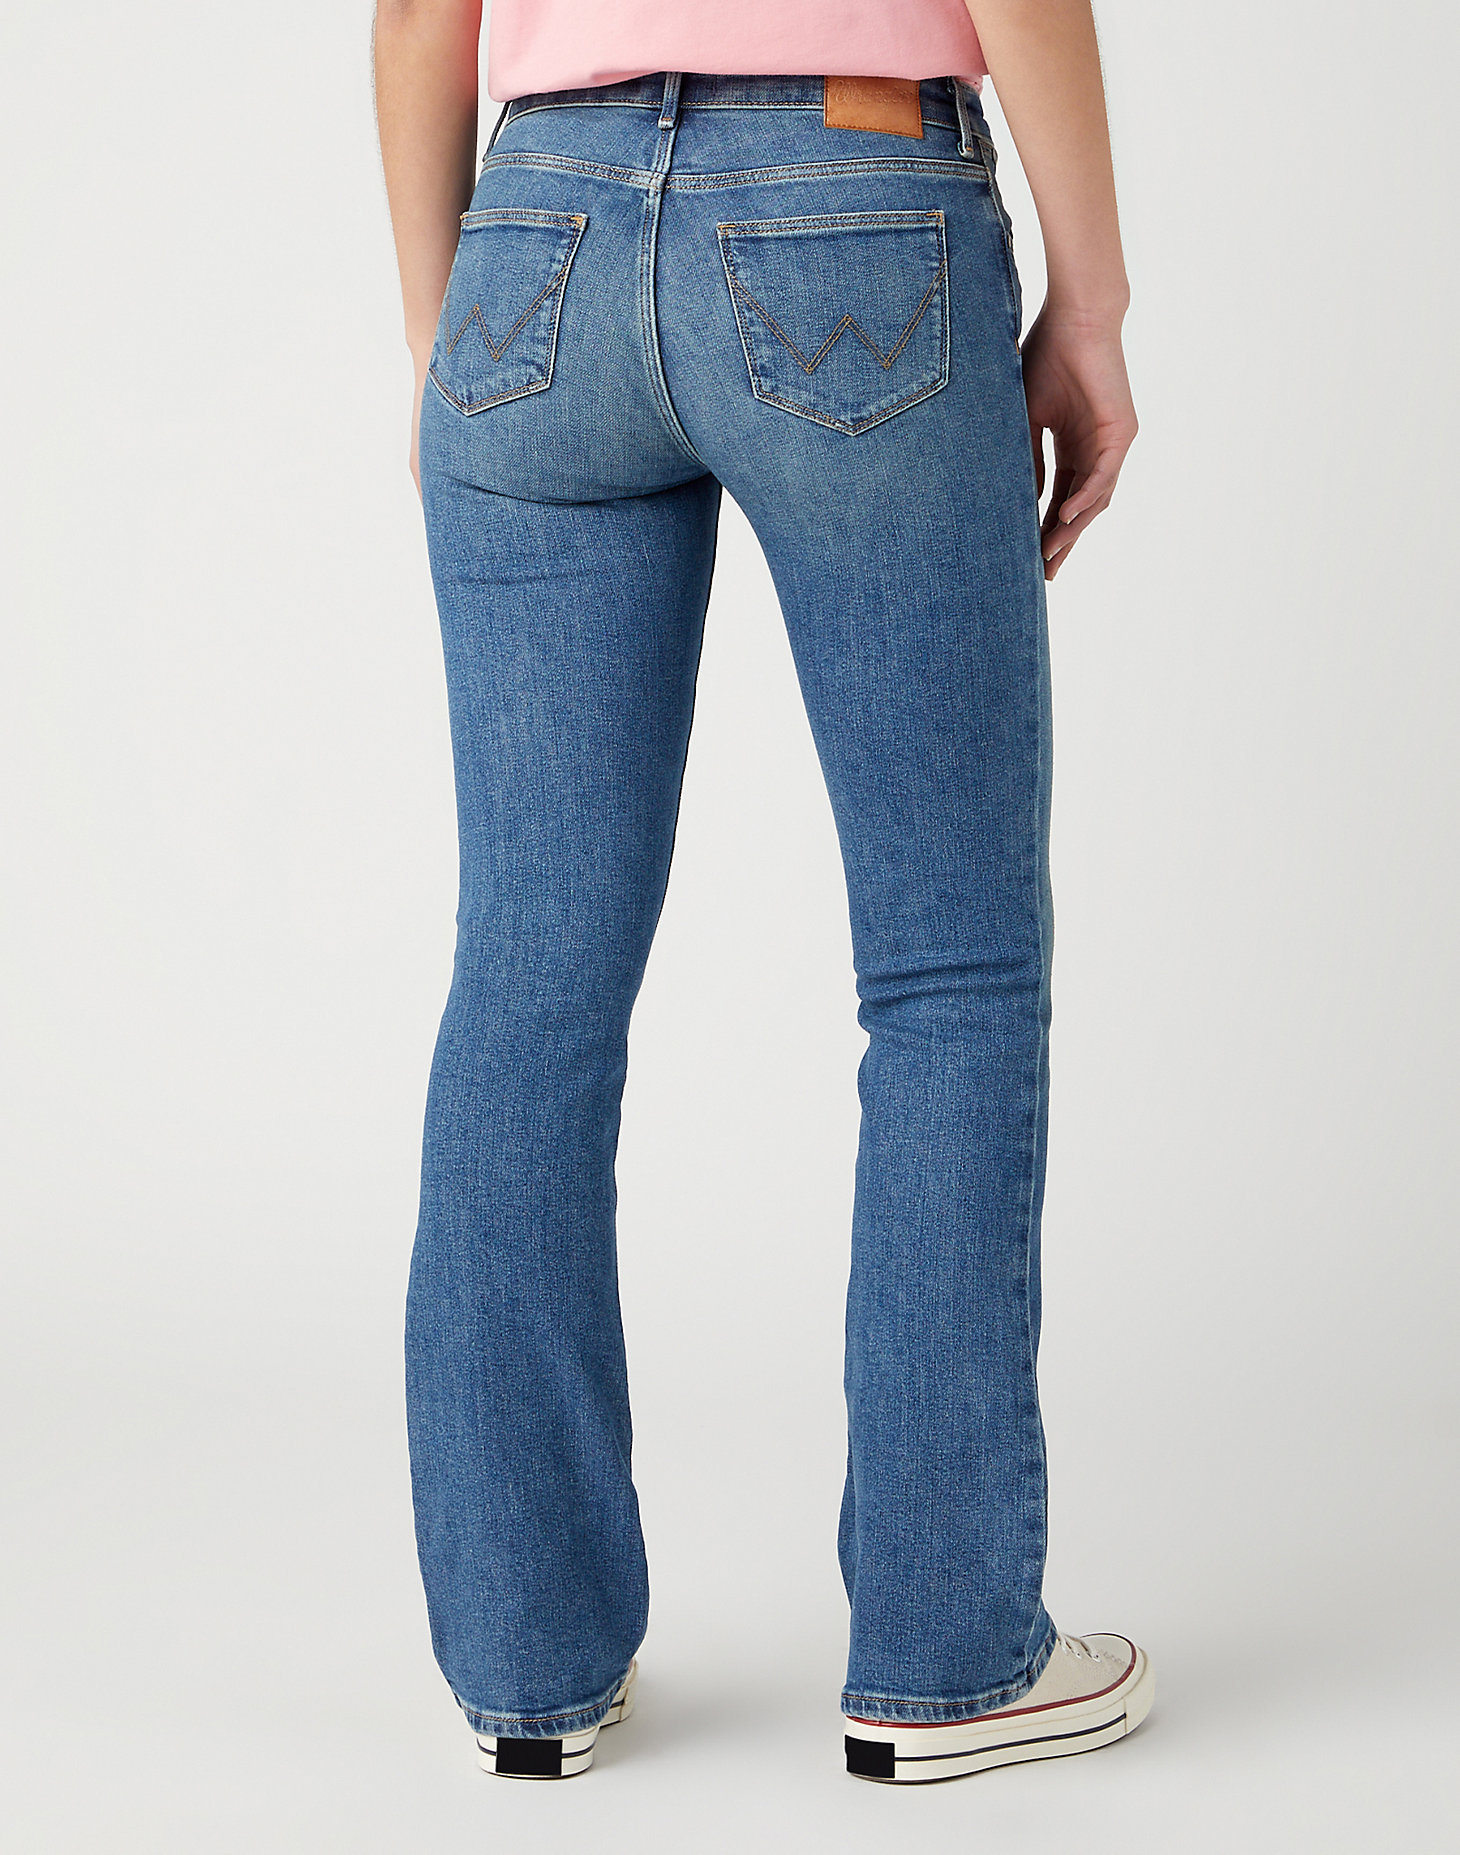 Bootcut Jeans in Girlband alternative view 2